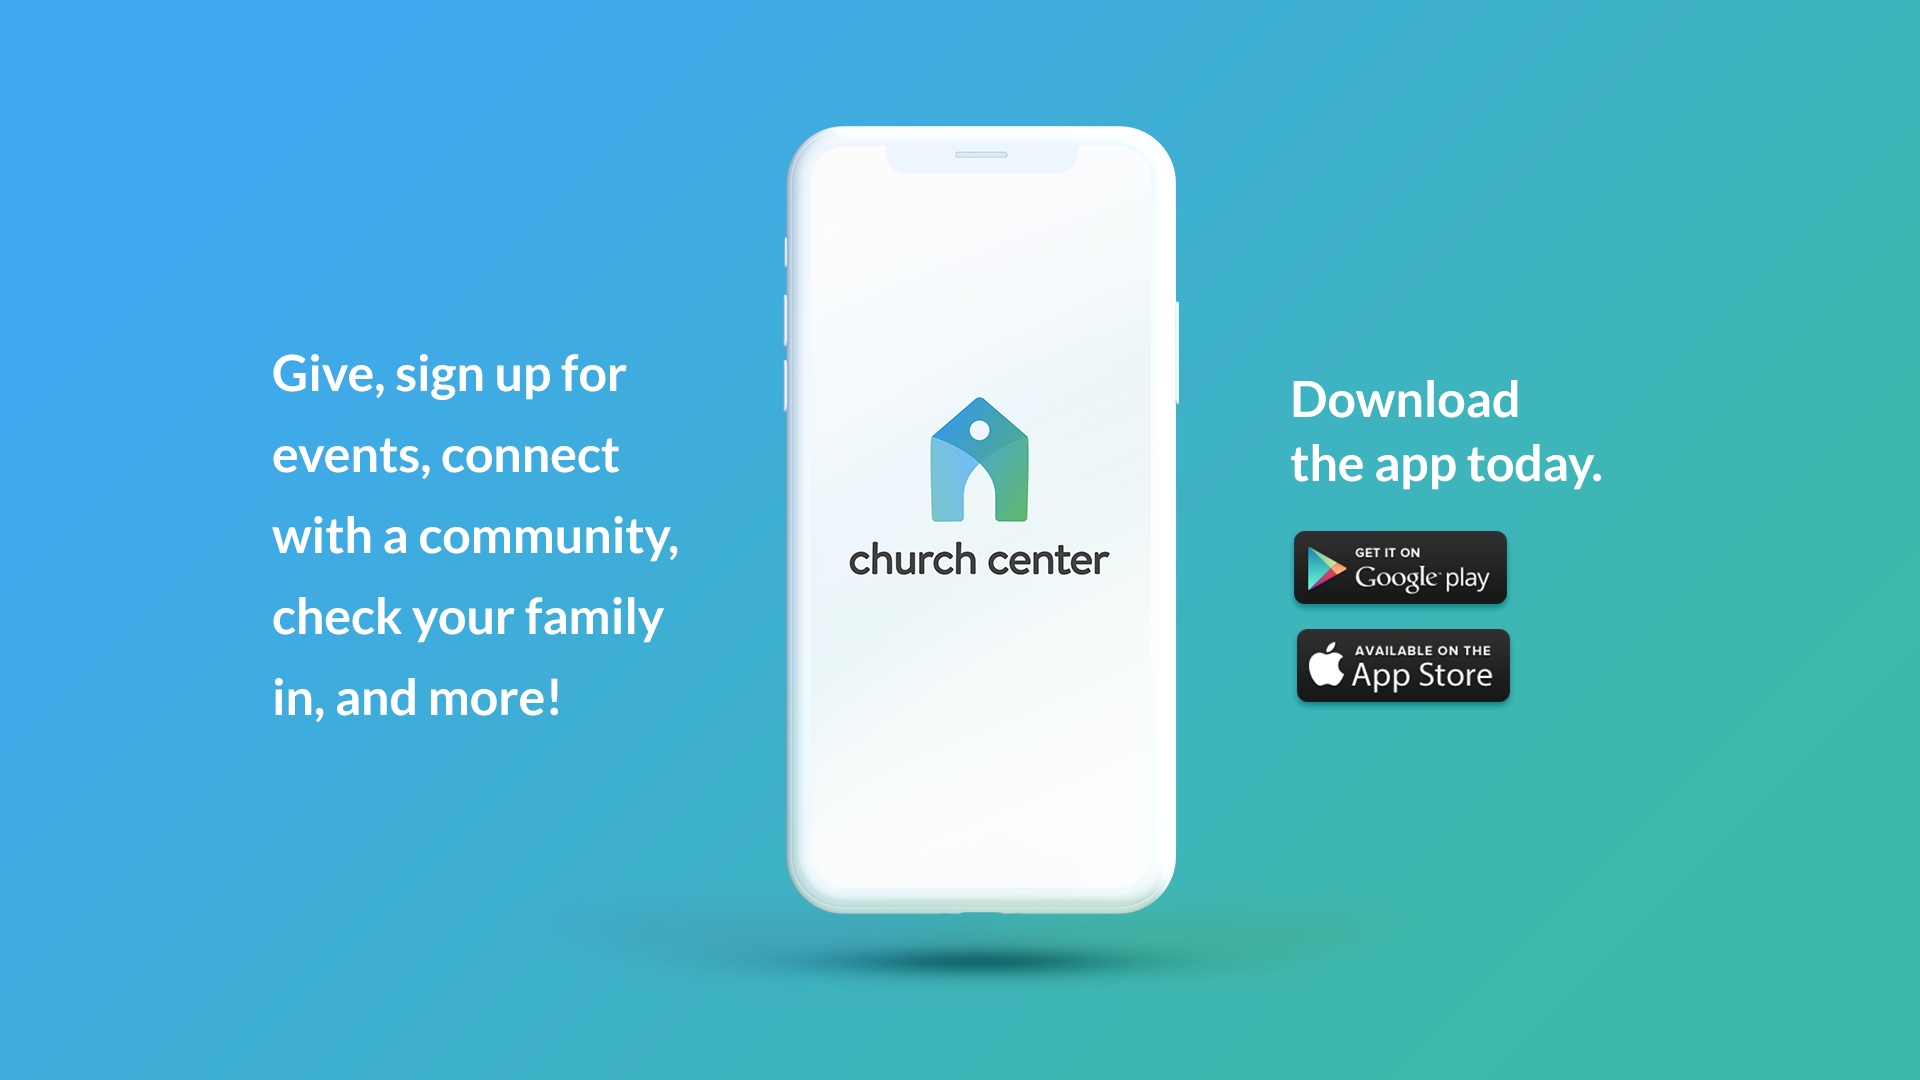 Church Center download today